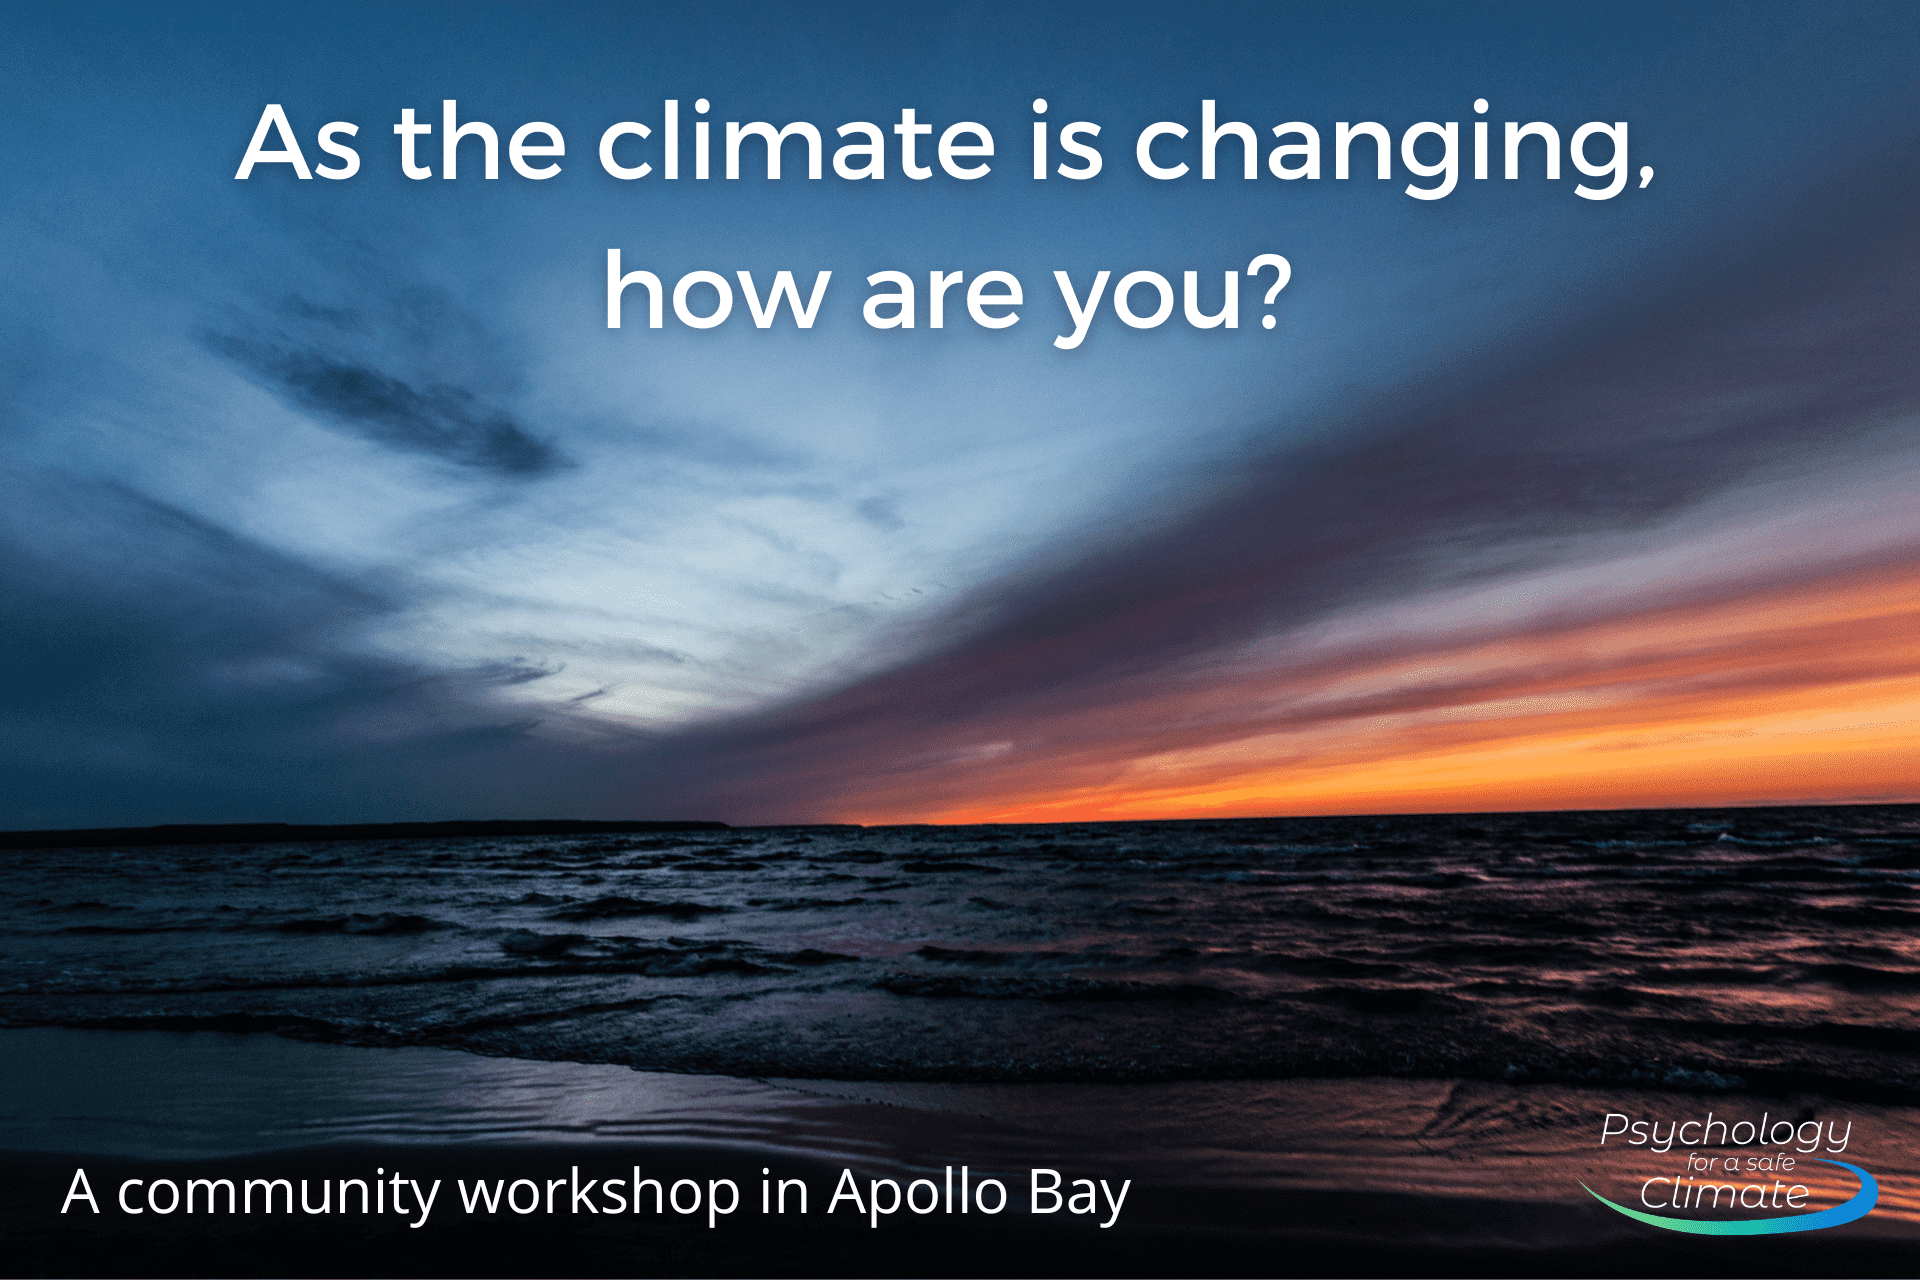 As the climate is changing, how are you?